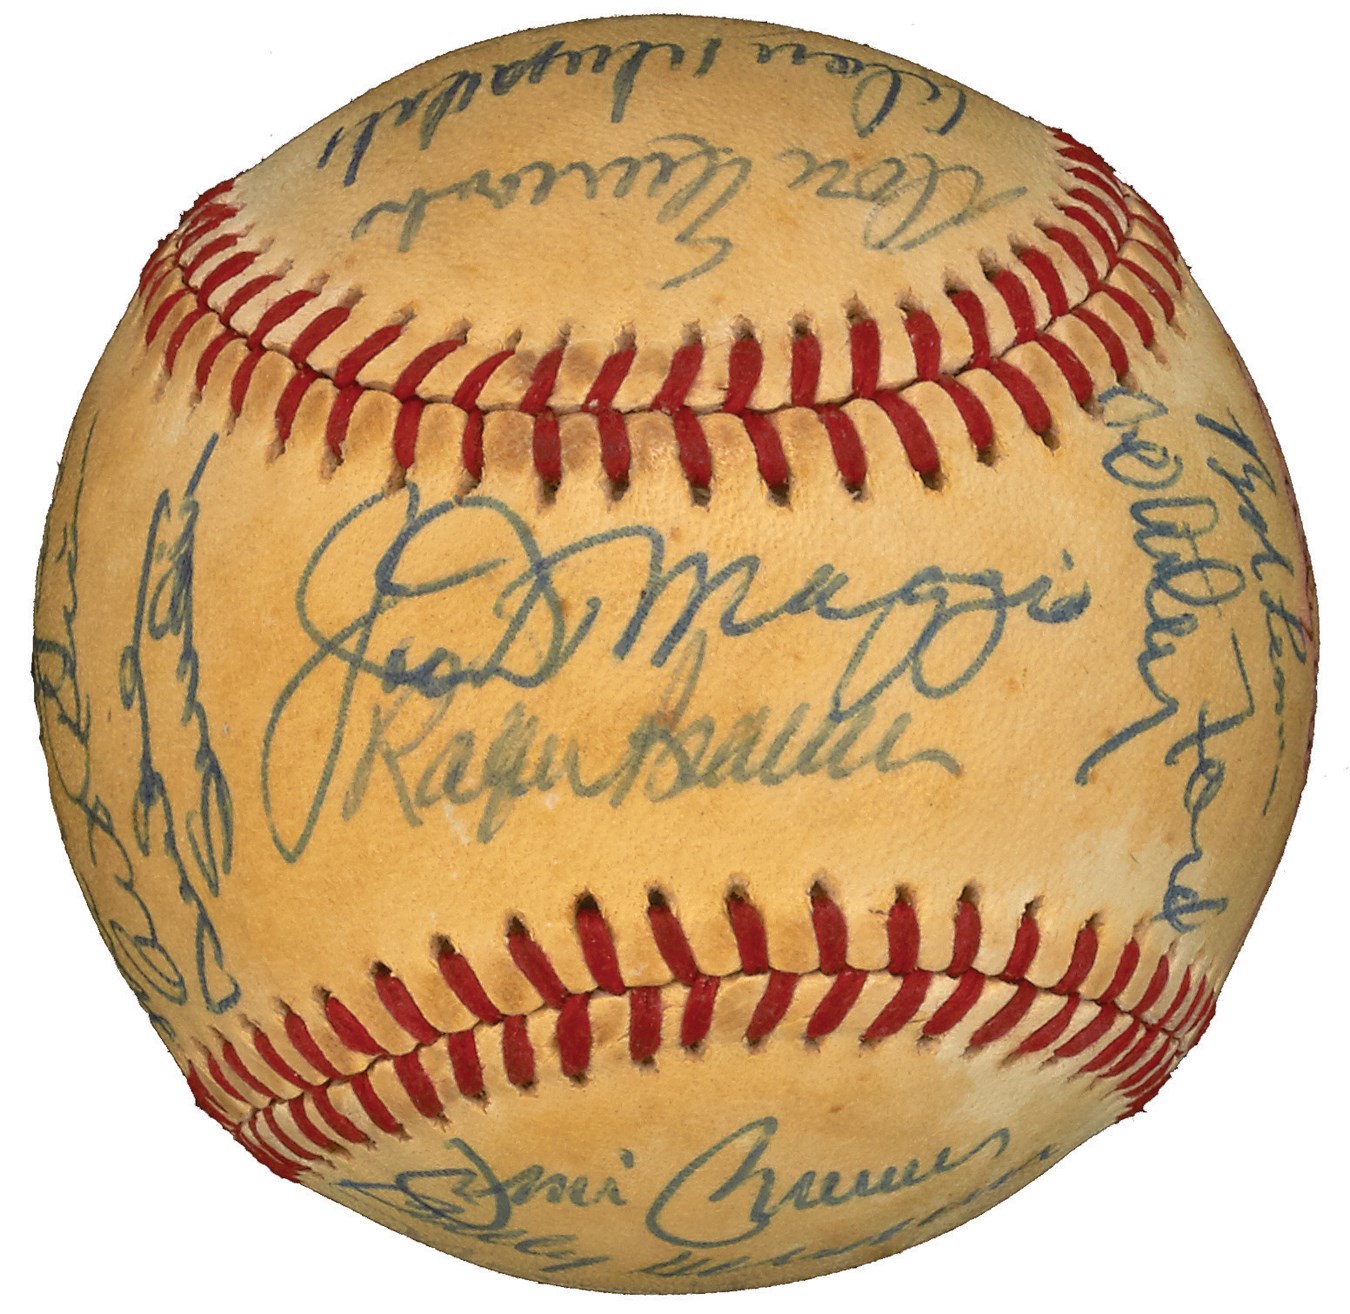 Baseball Autographs - Hall Of Fame Signed Baseball with Maris, DiMaggio, Koufax & More (24)